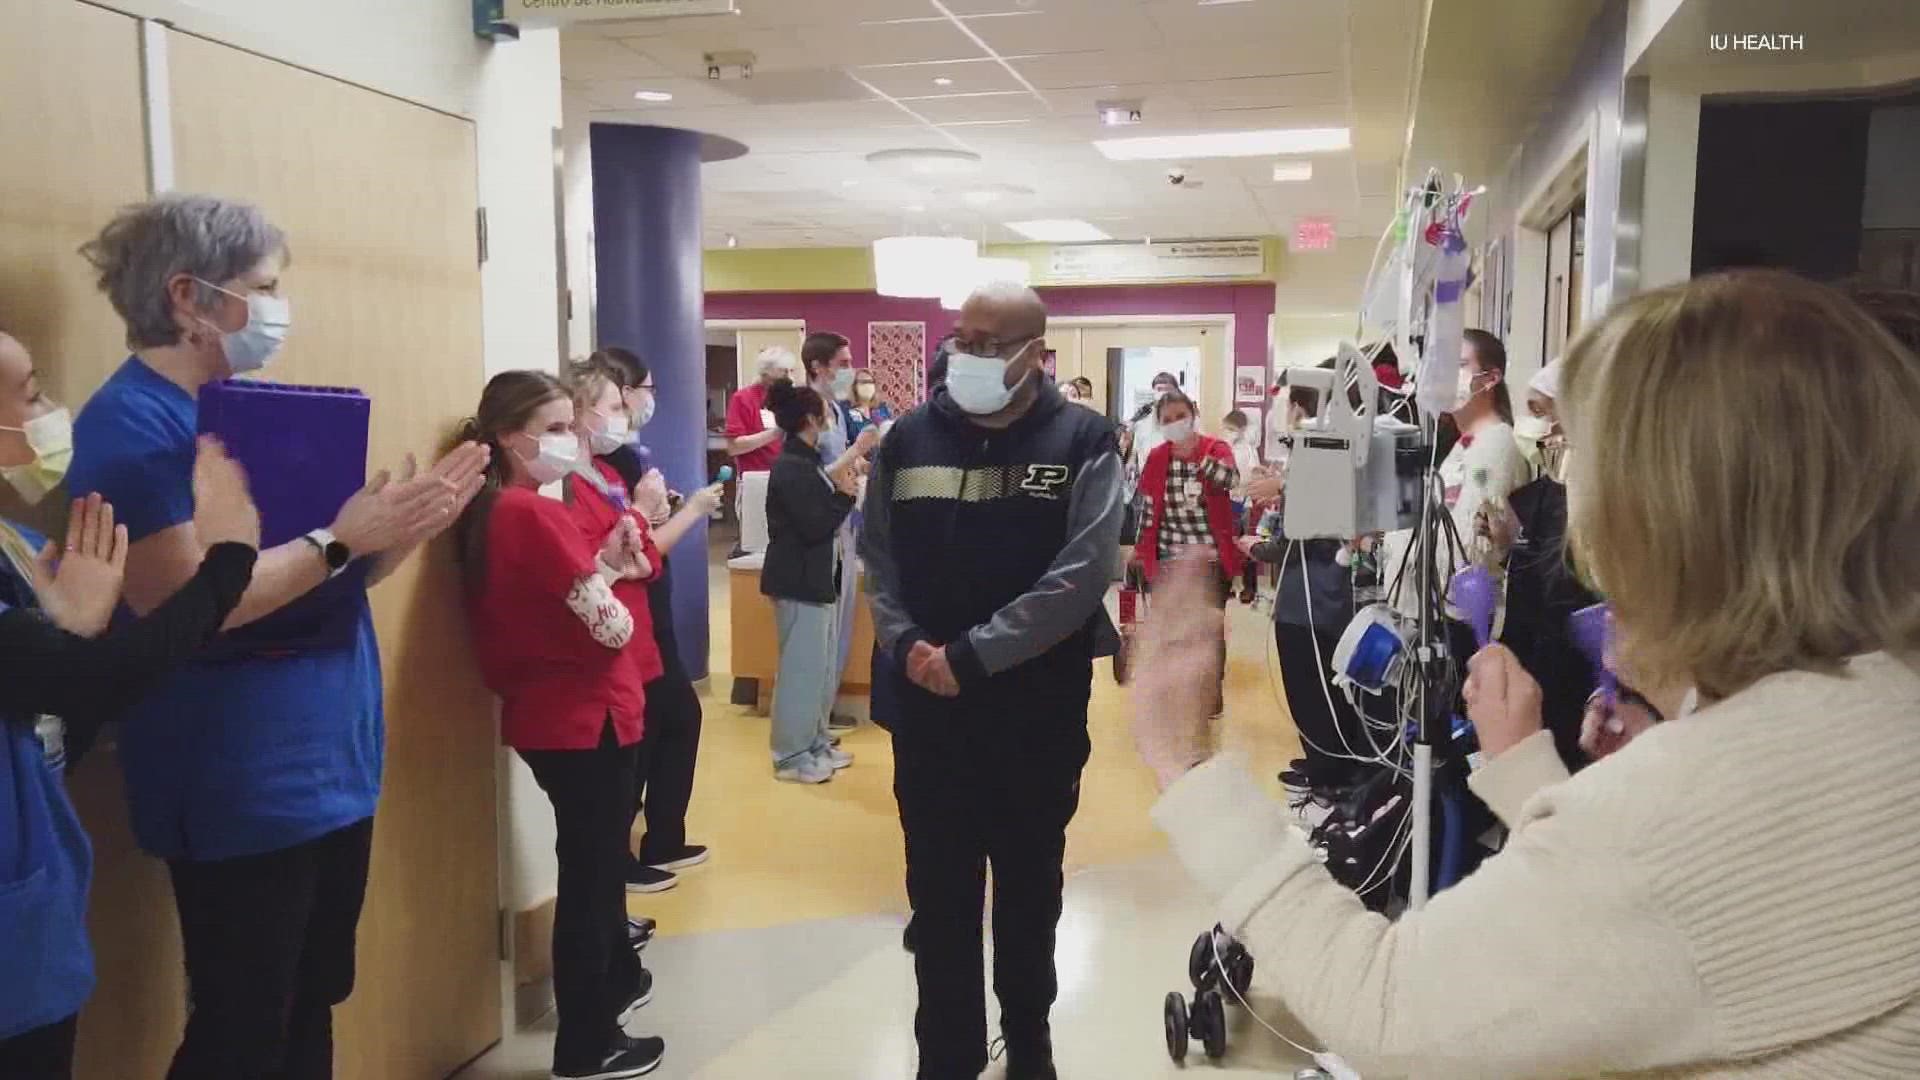 Omarr Gadling got a hero's sendoff after spending more than a year in the hospital, getting a new heart.